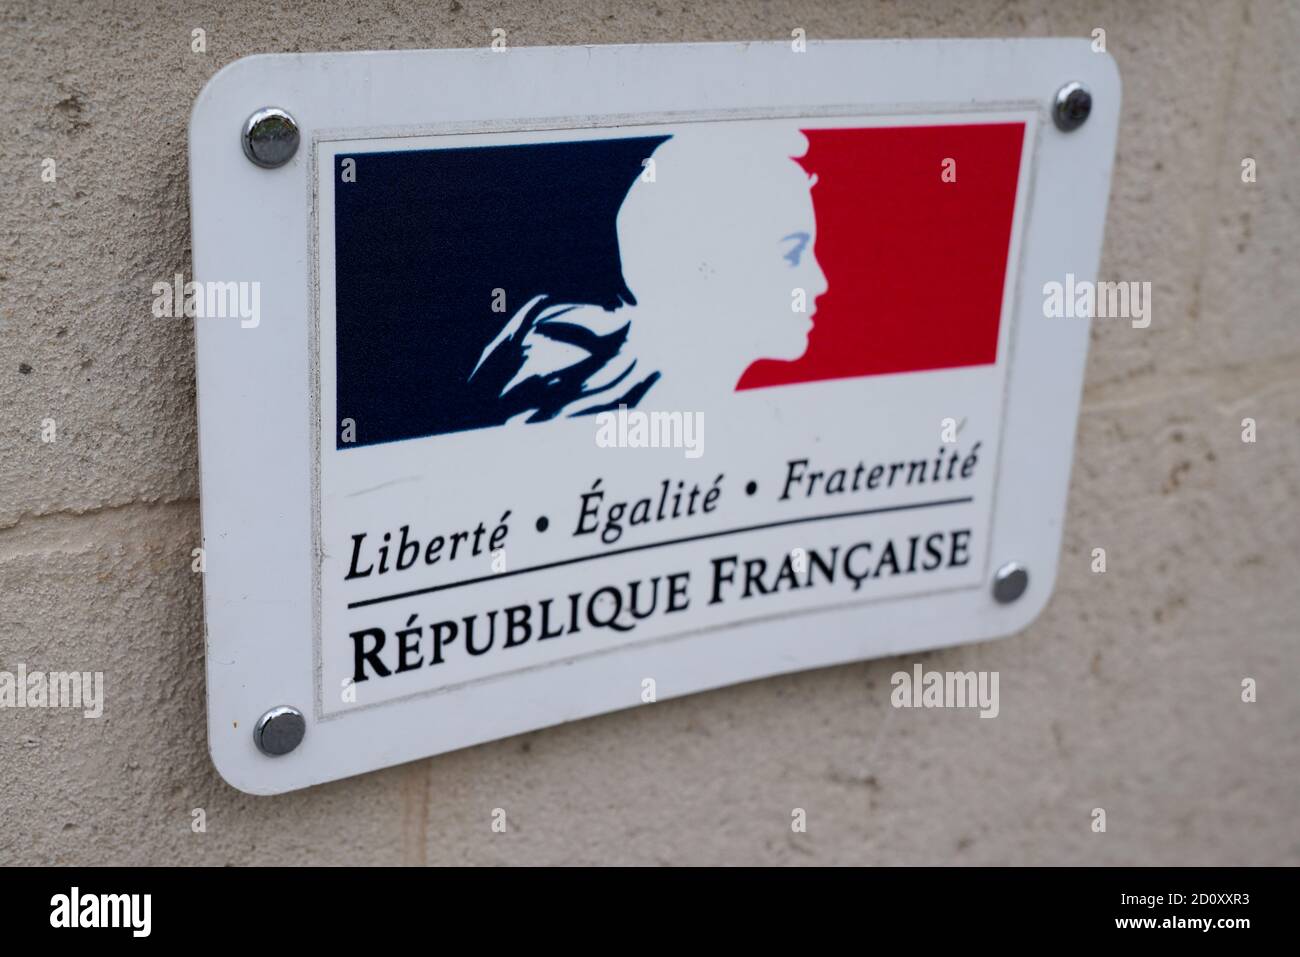 Bordeaux , Aquitaine / France - 09 25 2020 : Republique Francaise sign text and logo of France Republic freedom equality fraternity french panel board Stock Photo